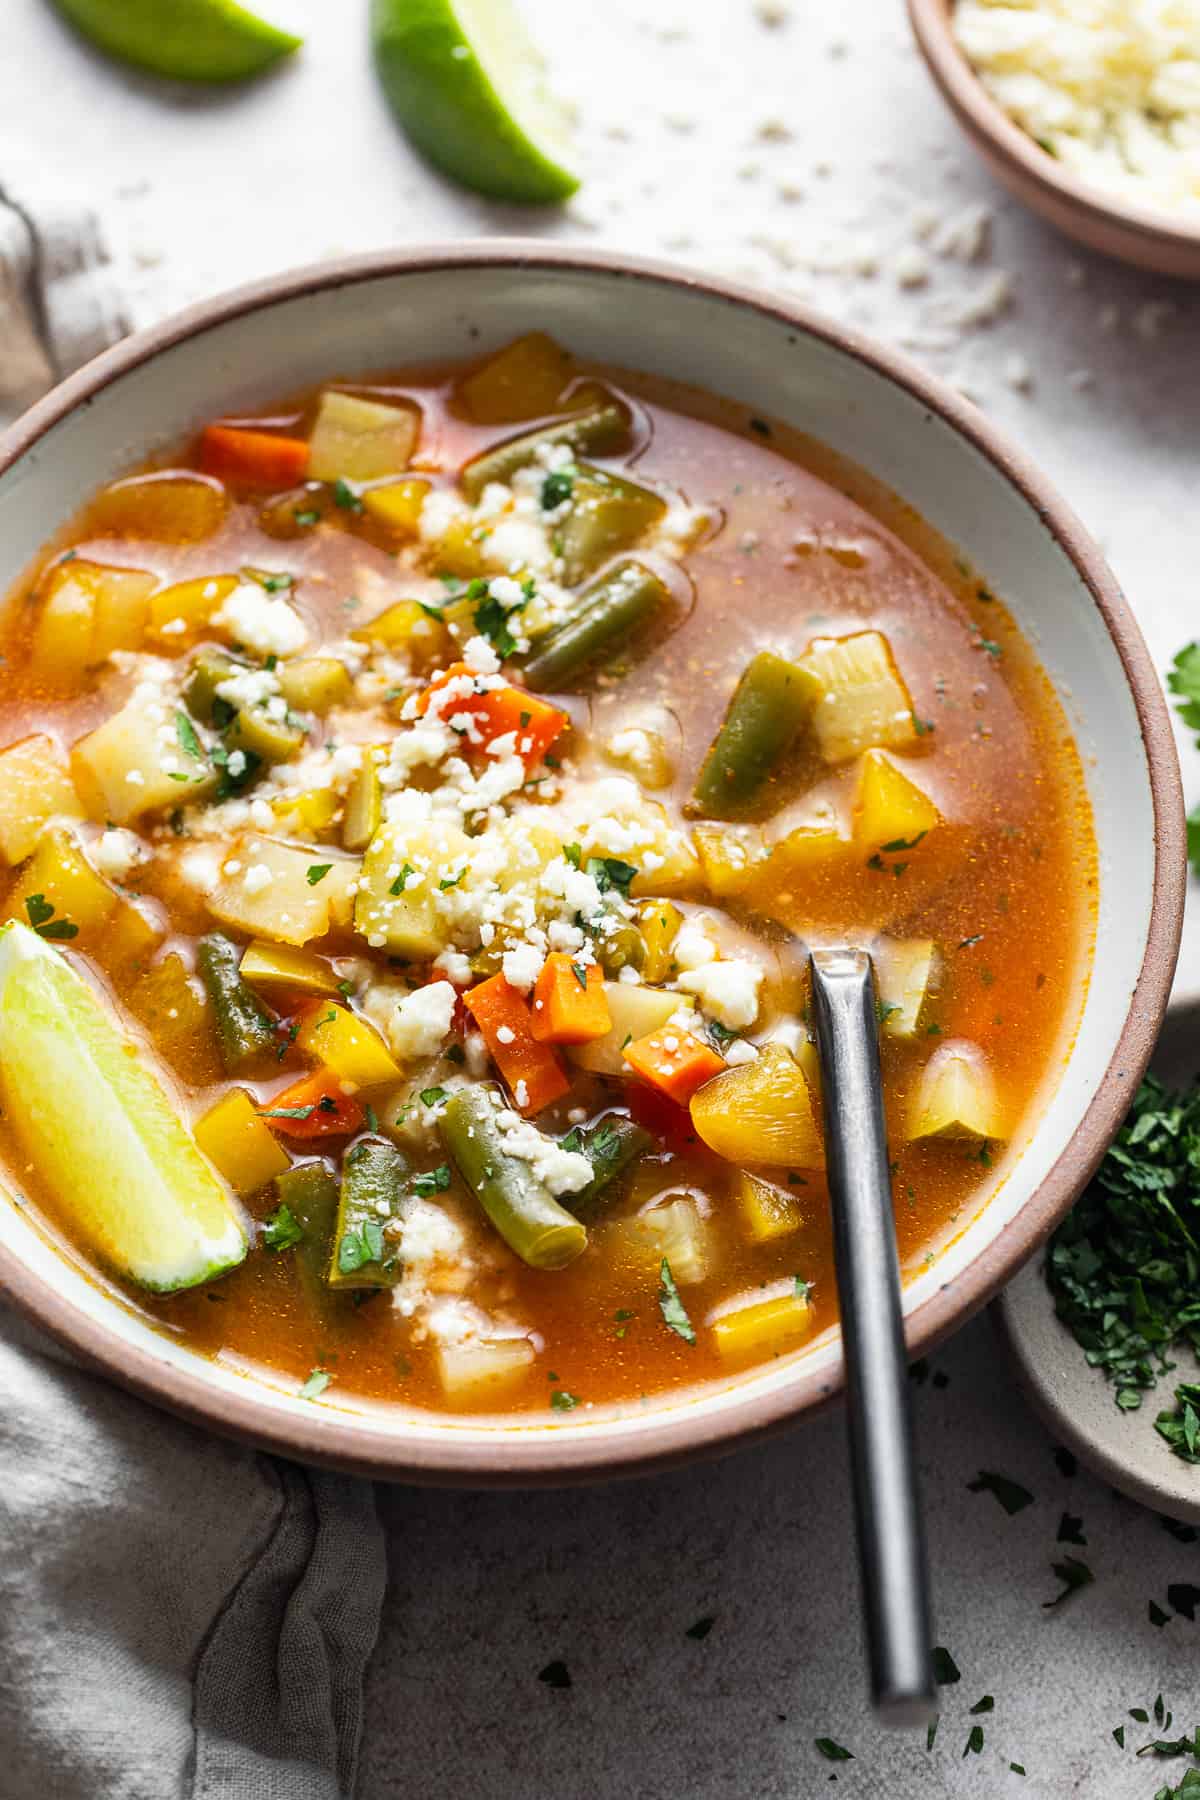 A warm bowl of Mexican vegetable soup served with a lime wedge and sprinkled with cotija cheese.